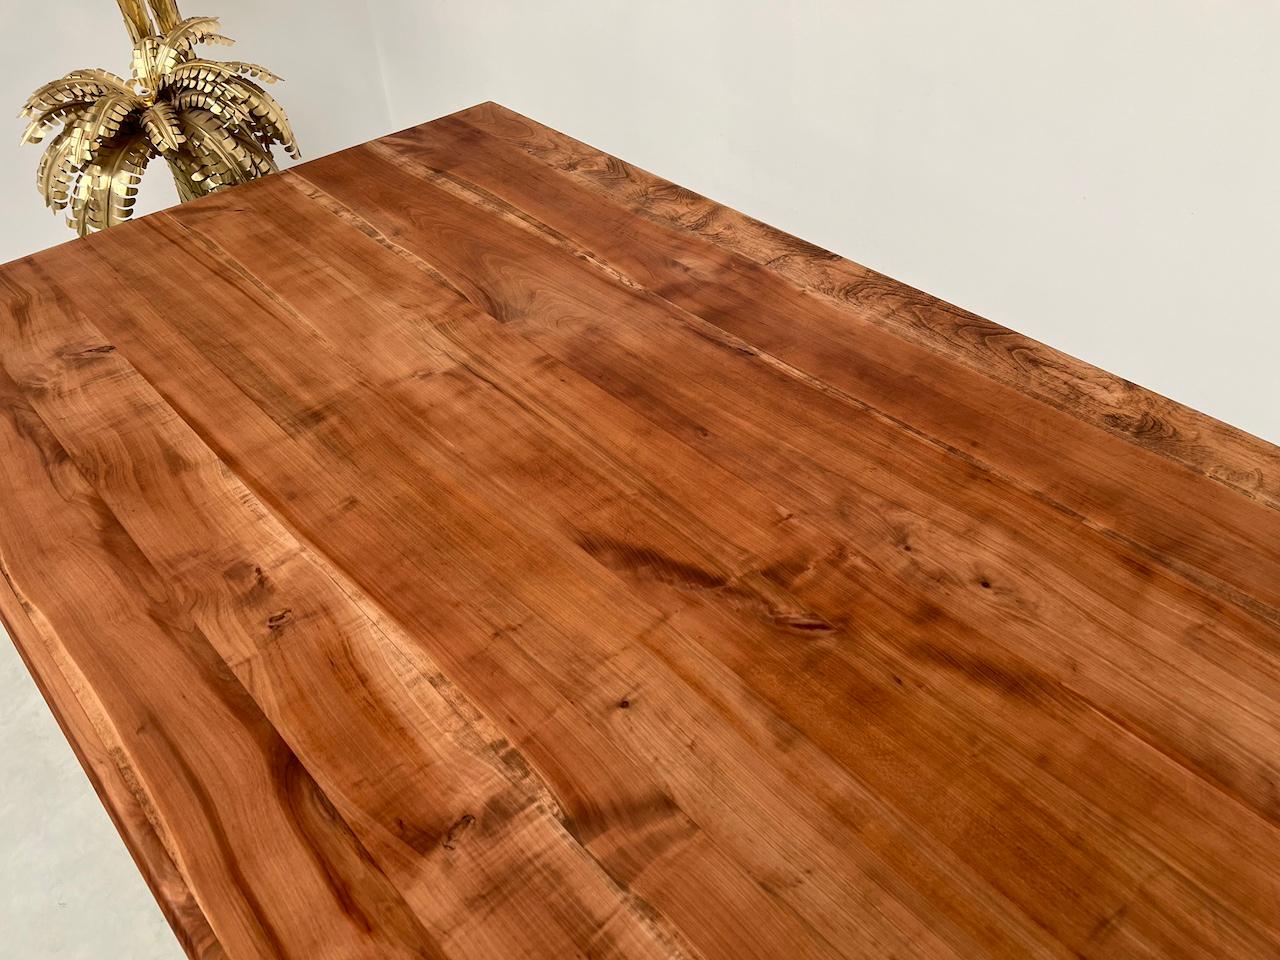 Large solid cherry farm table, 250 x 110 cm For Sale 2